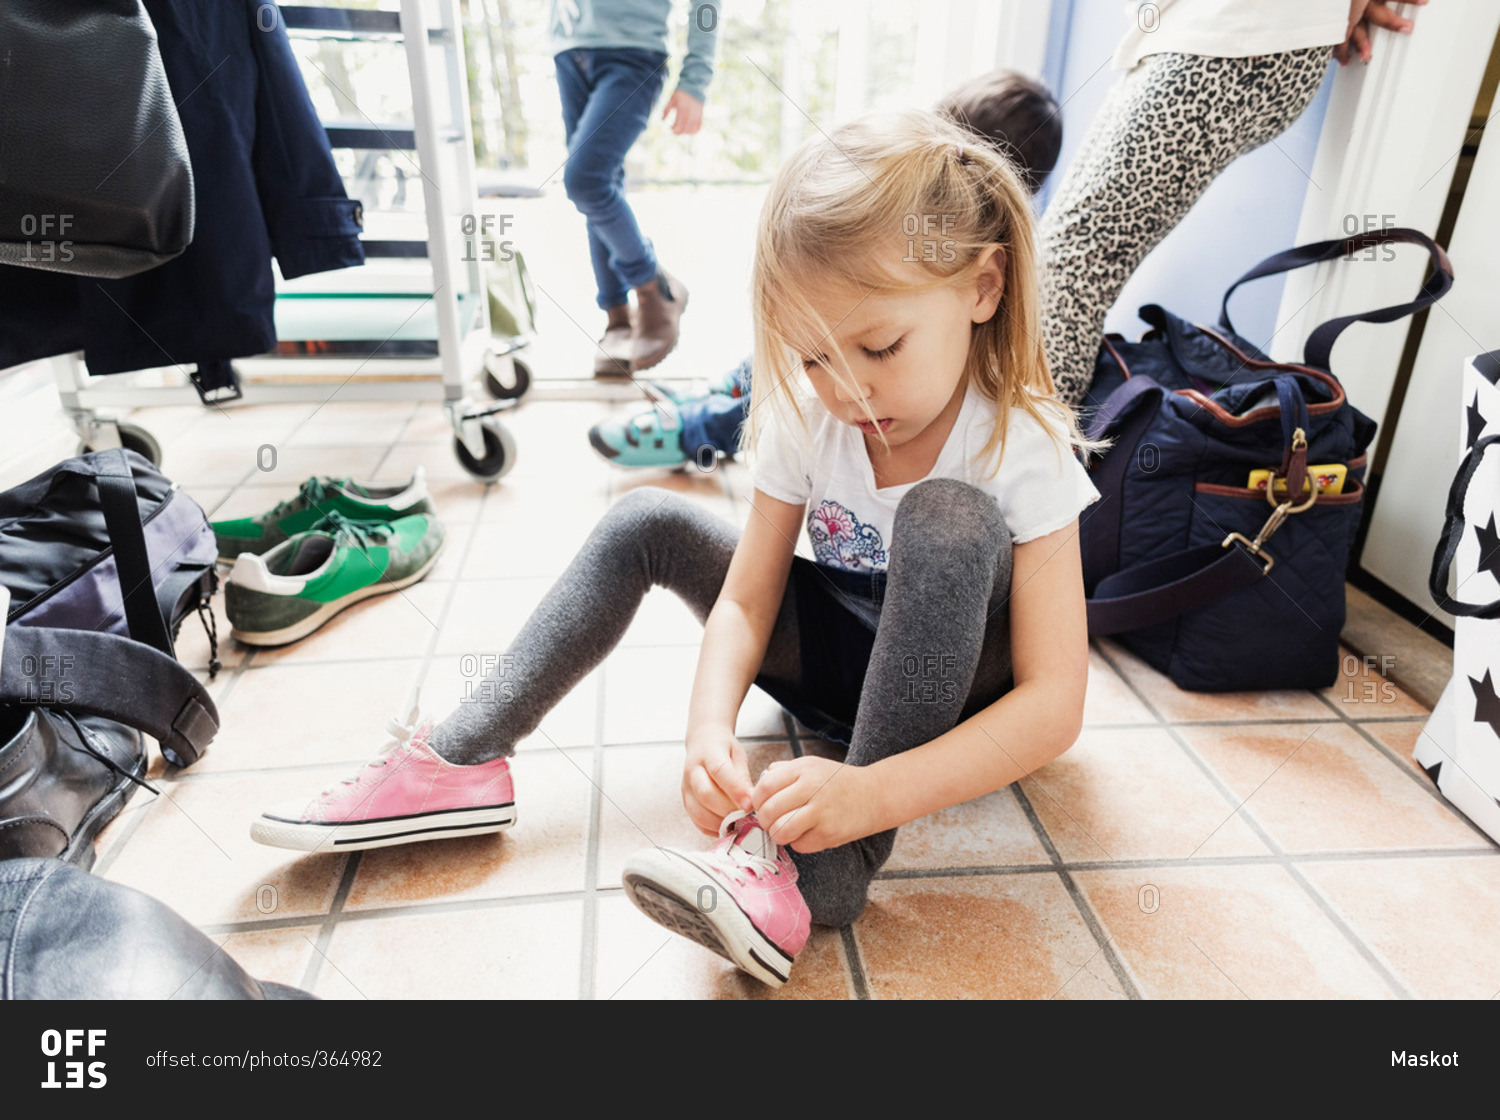 Girl wearing shoe while sitting on floor at day care center